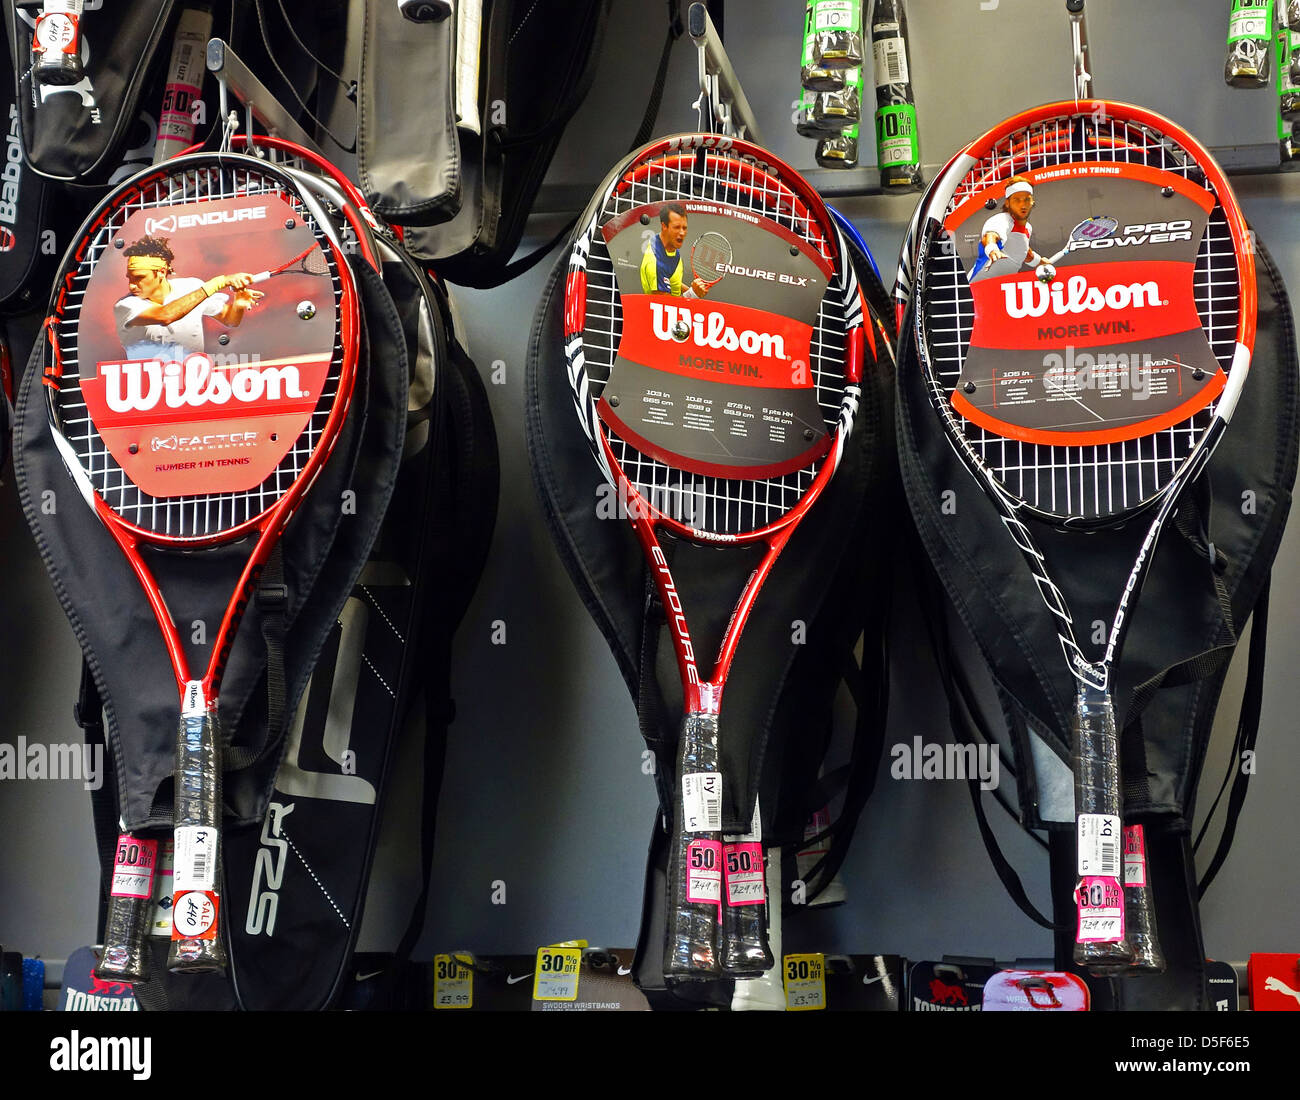 wilson tennis rackets on sale in sports store Stock Photo